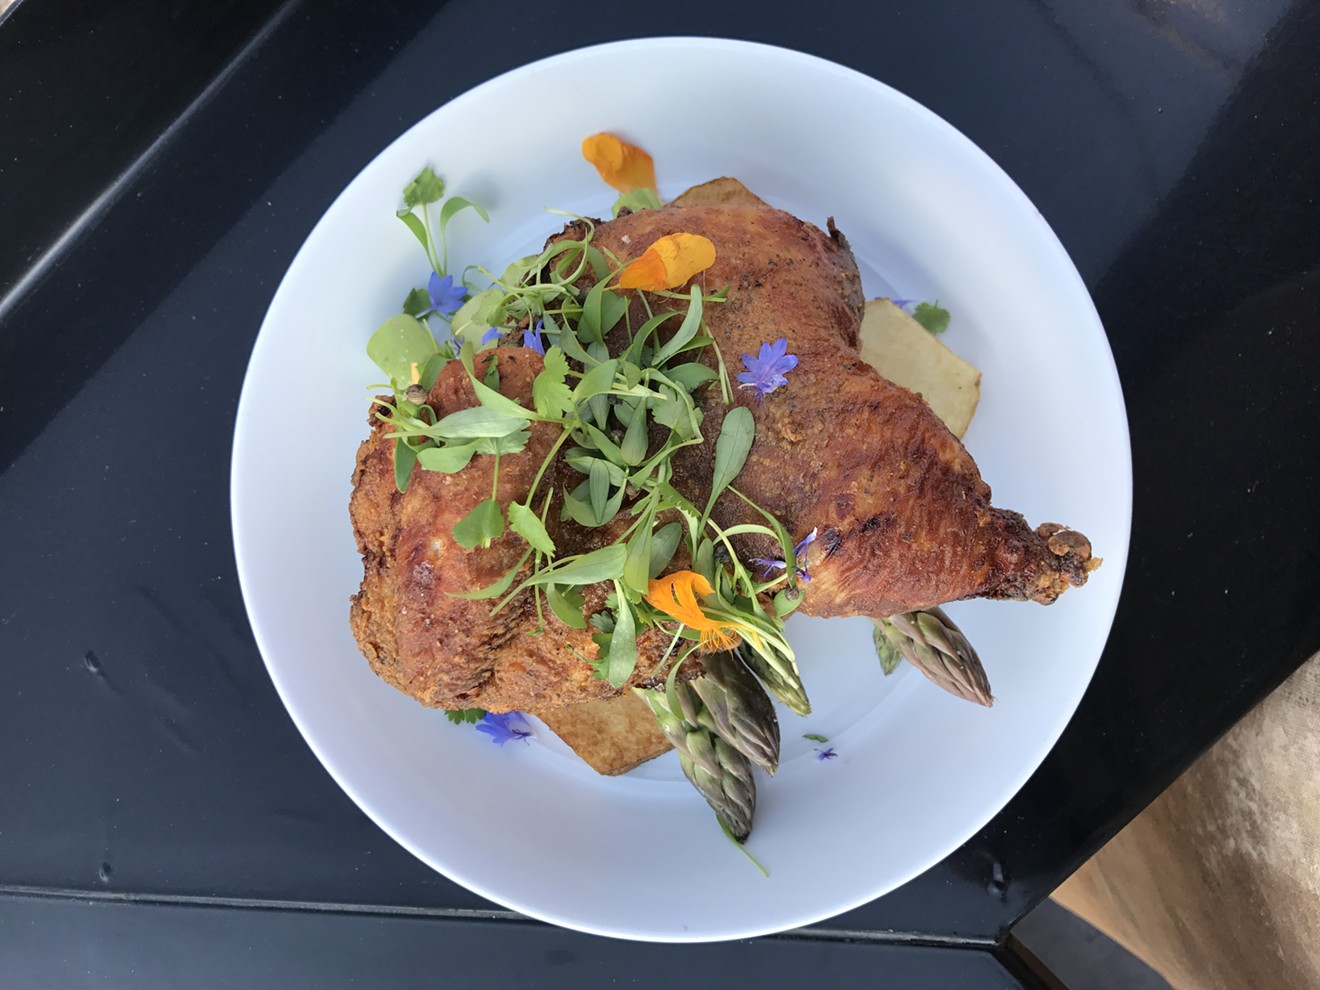 Says Hadley of this dish: "I was at work one day and fried half of a chicken with garam masala spices! Just playing around."